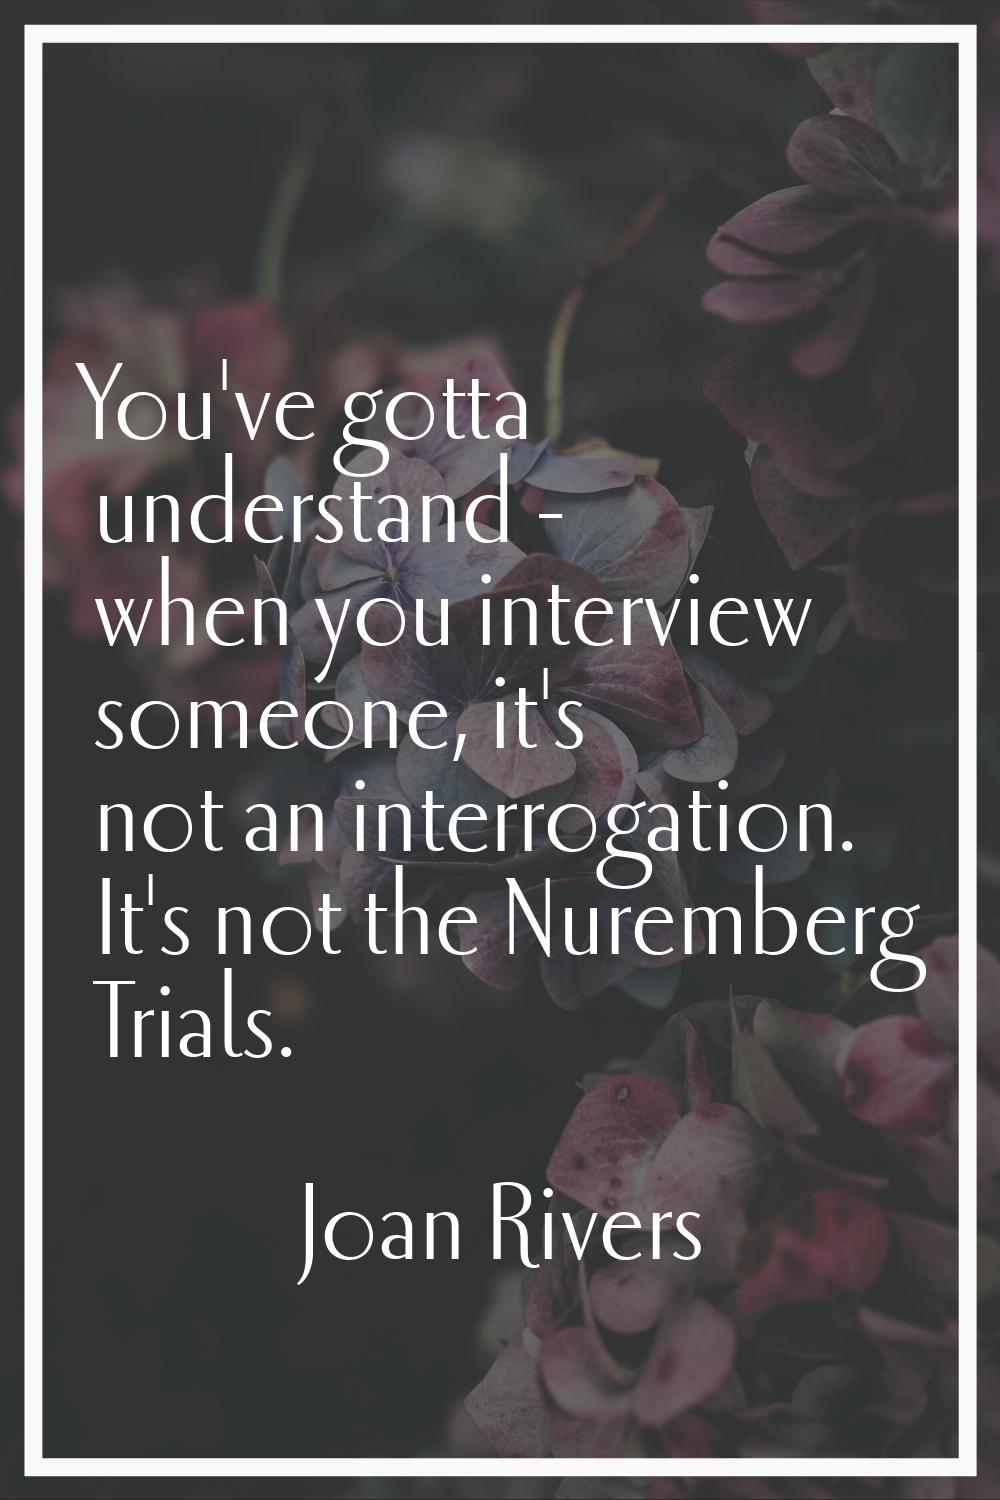 You've gotta understand - when you interview someone, it's not an interrogation. It's not the Nurem